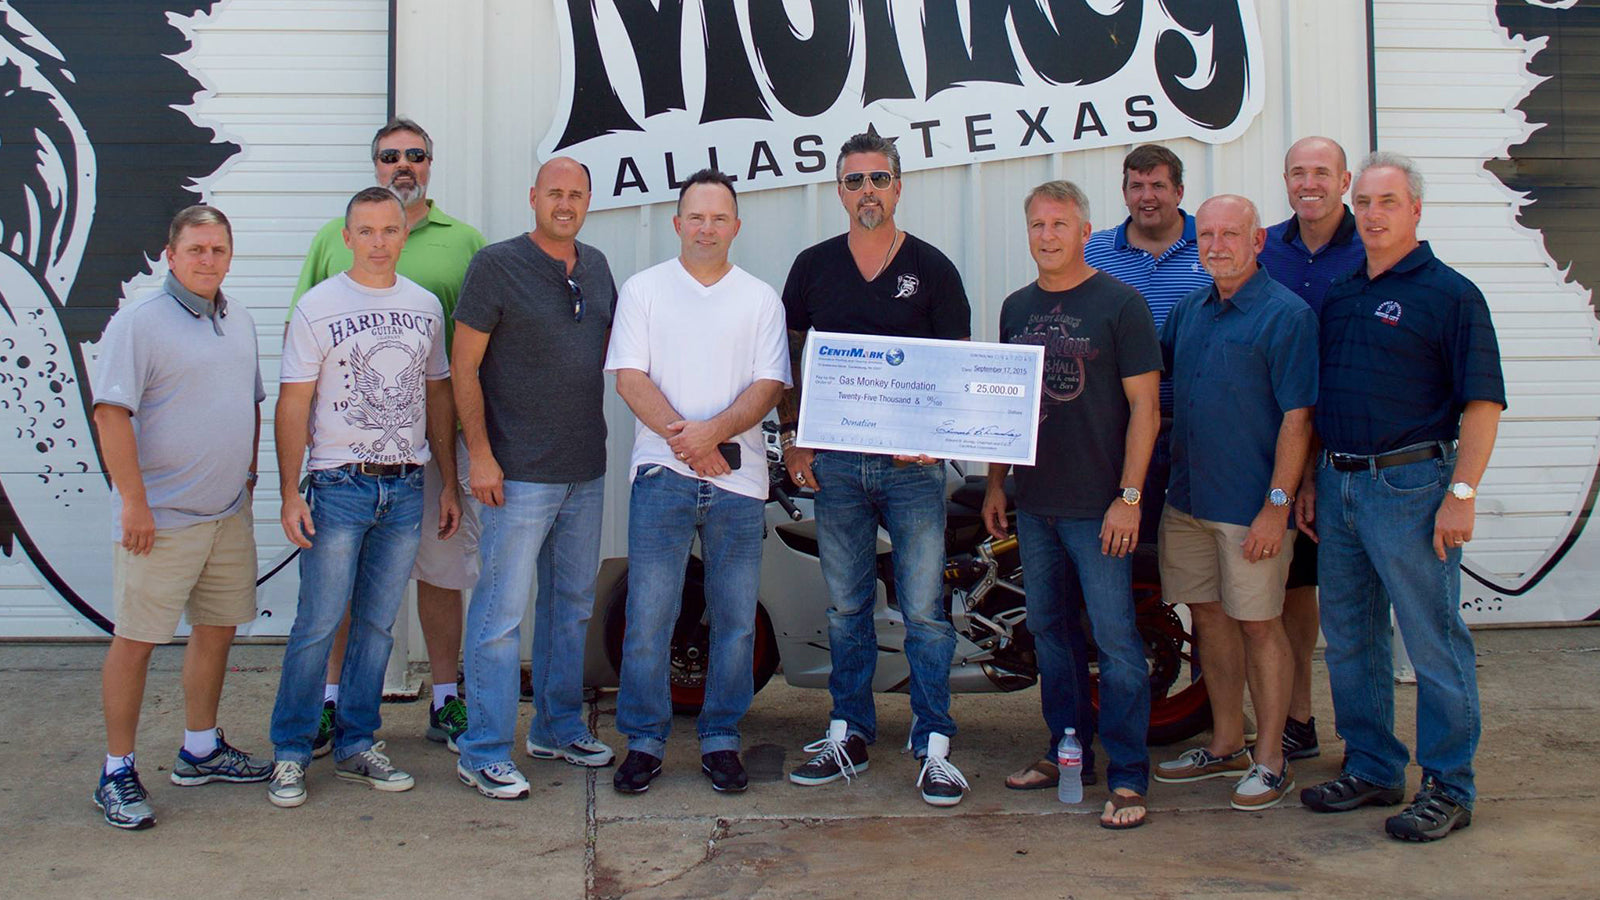 Gas Monkey Foundation team holding a big check in front of their garage